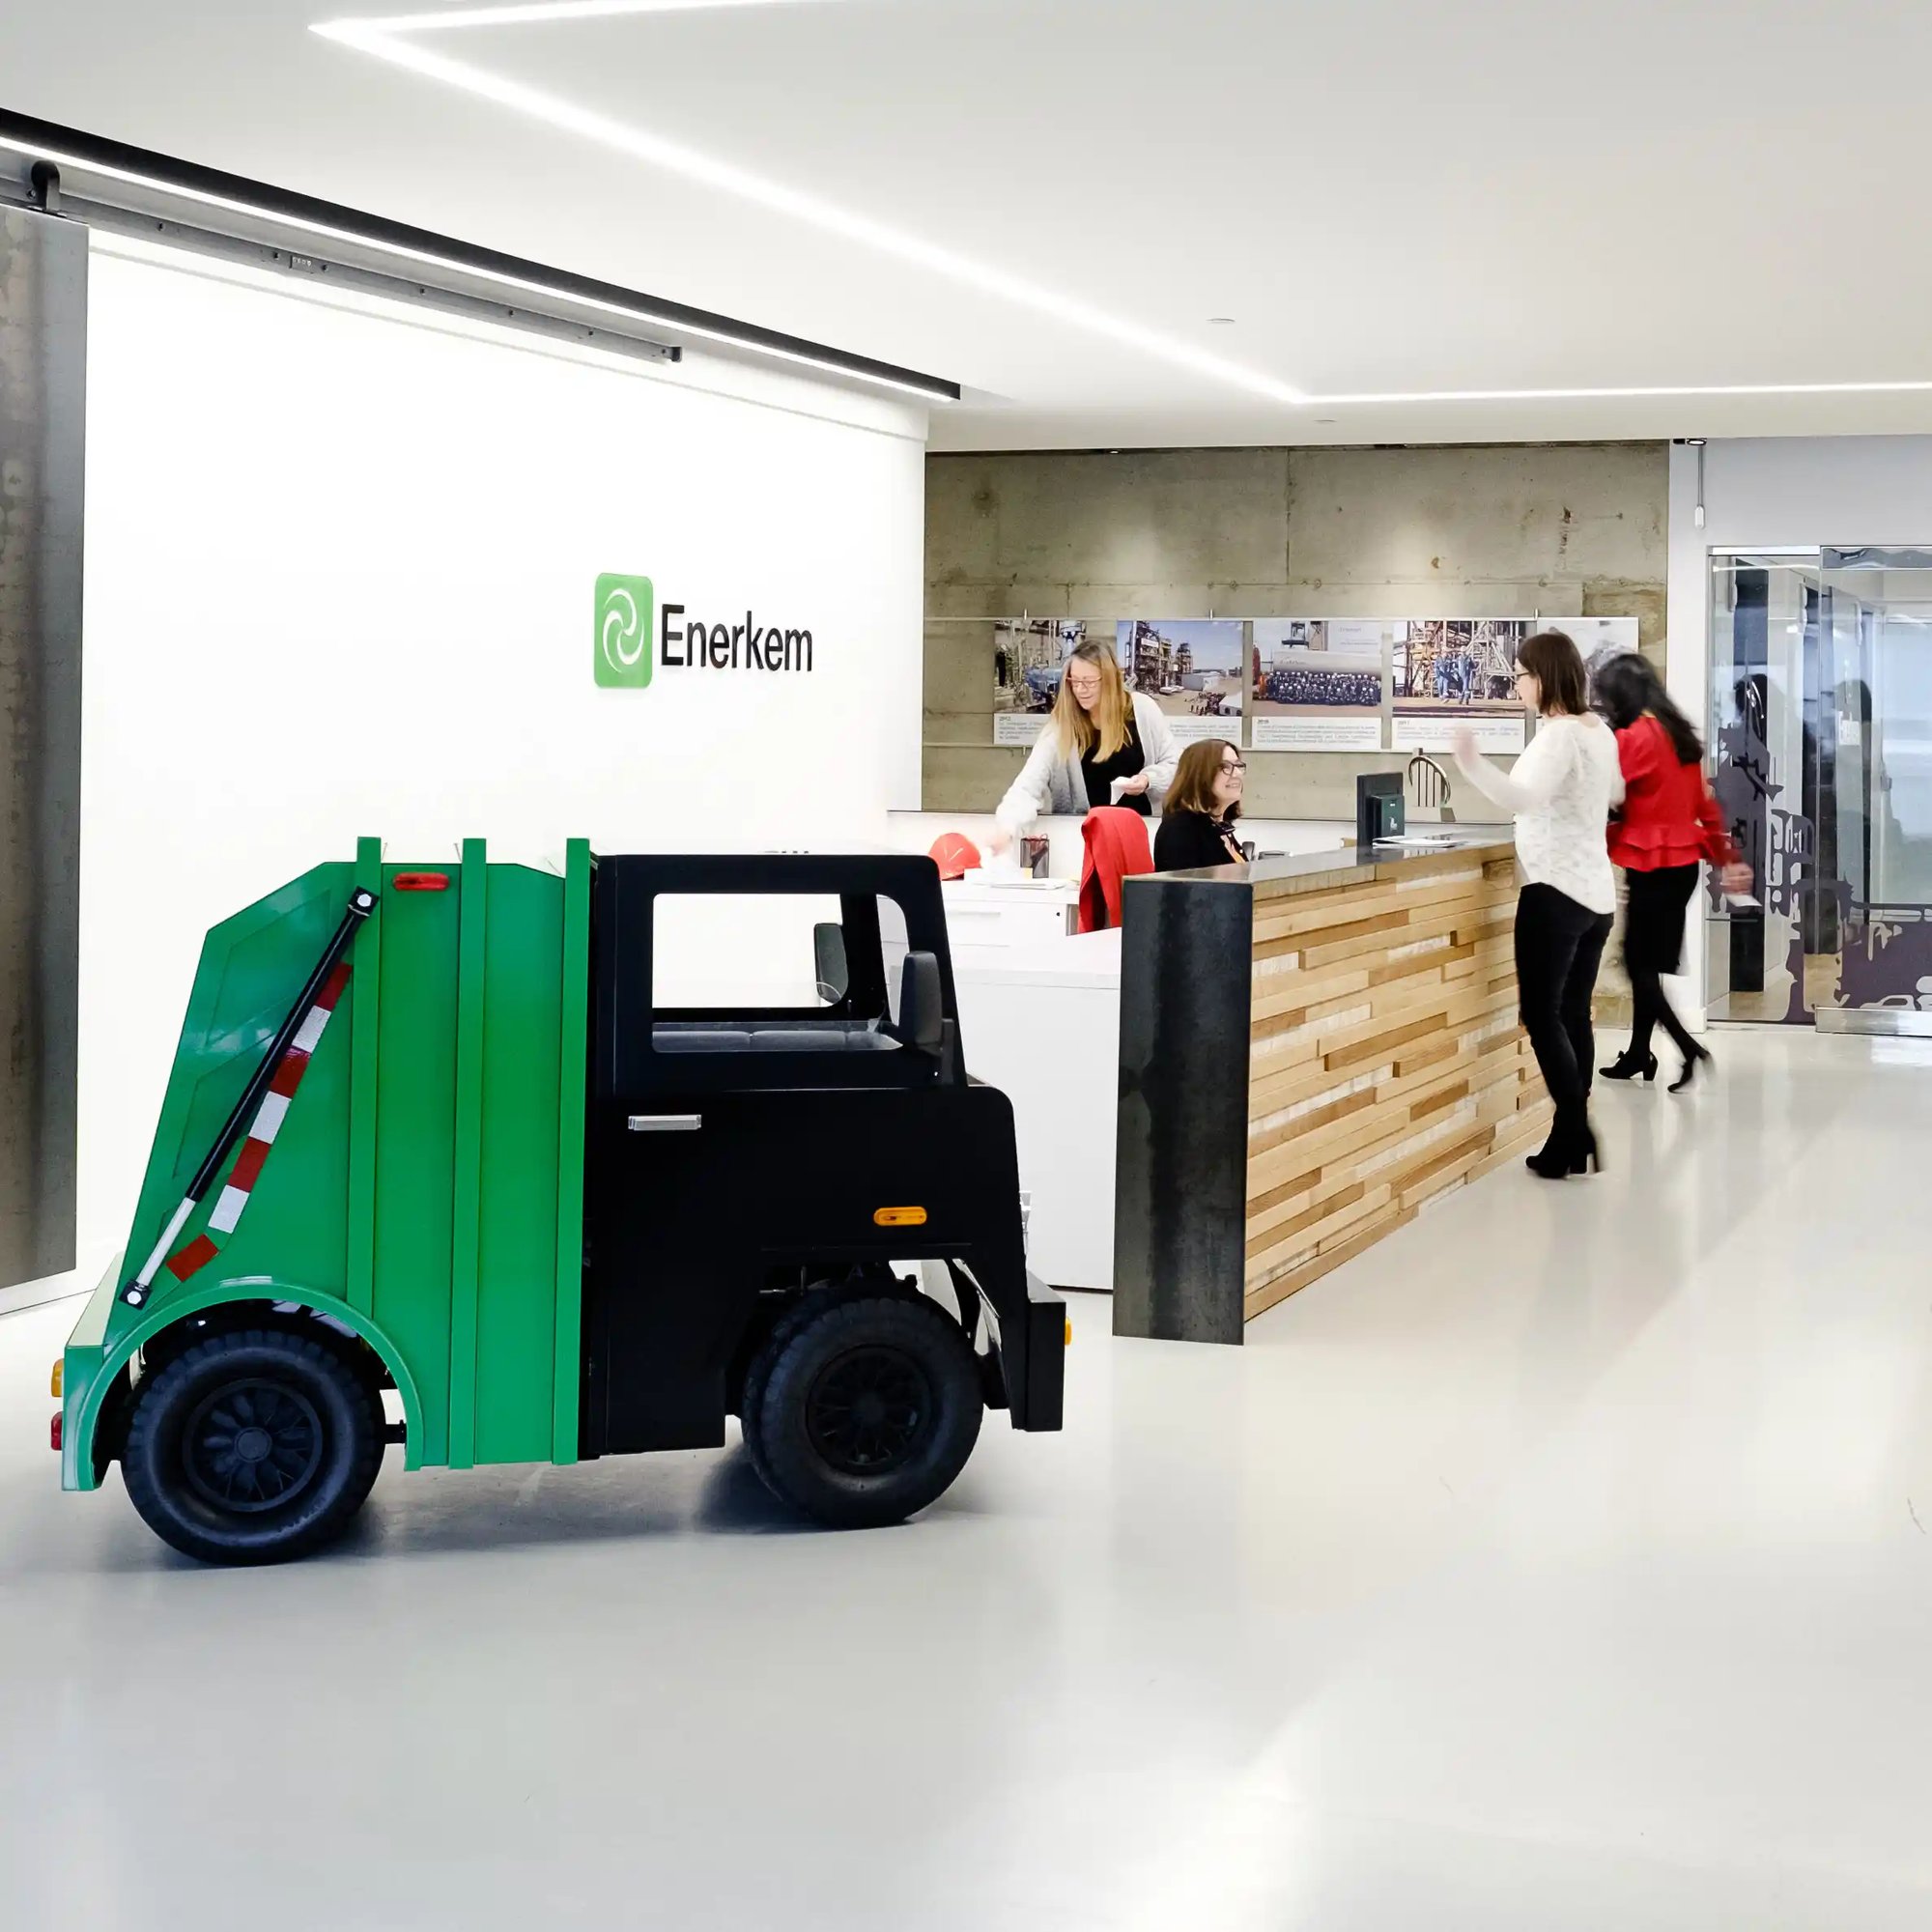 A model waste truck in the reception area of our premises